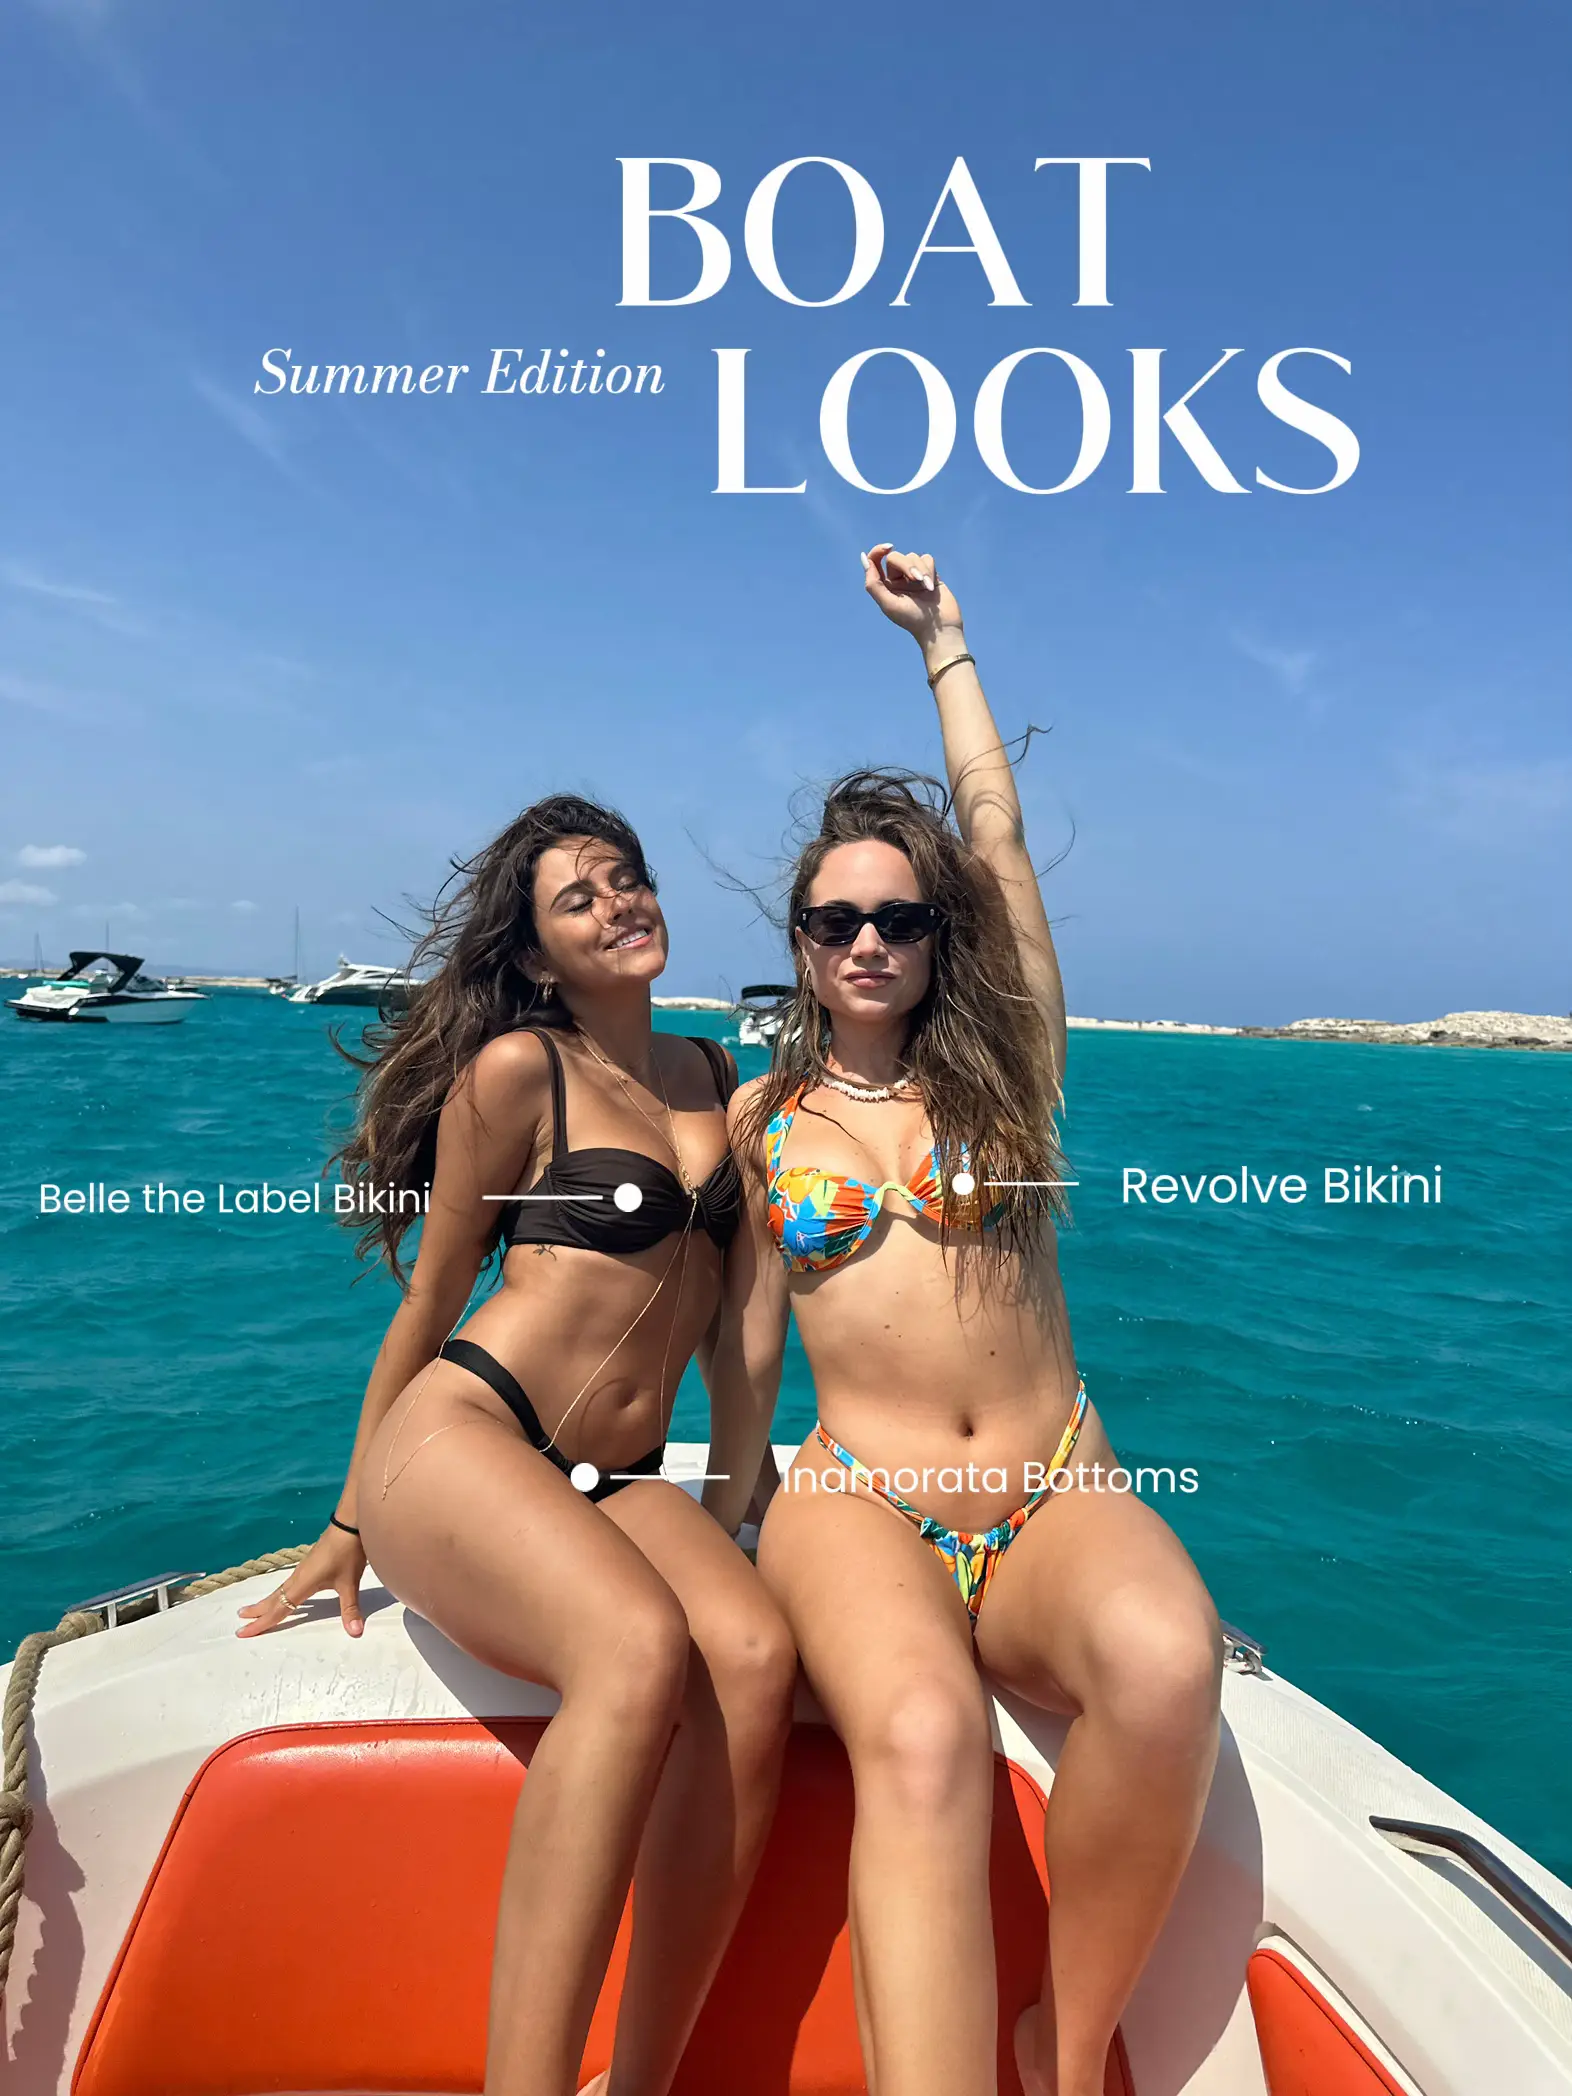 savoring summer swimsuit style  Summer swim suits, Swimsuits, Swimsuit  fashion